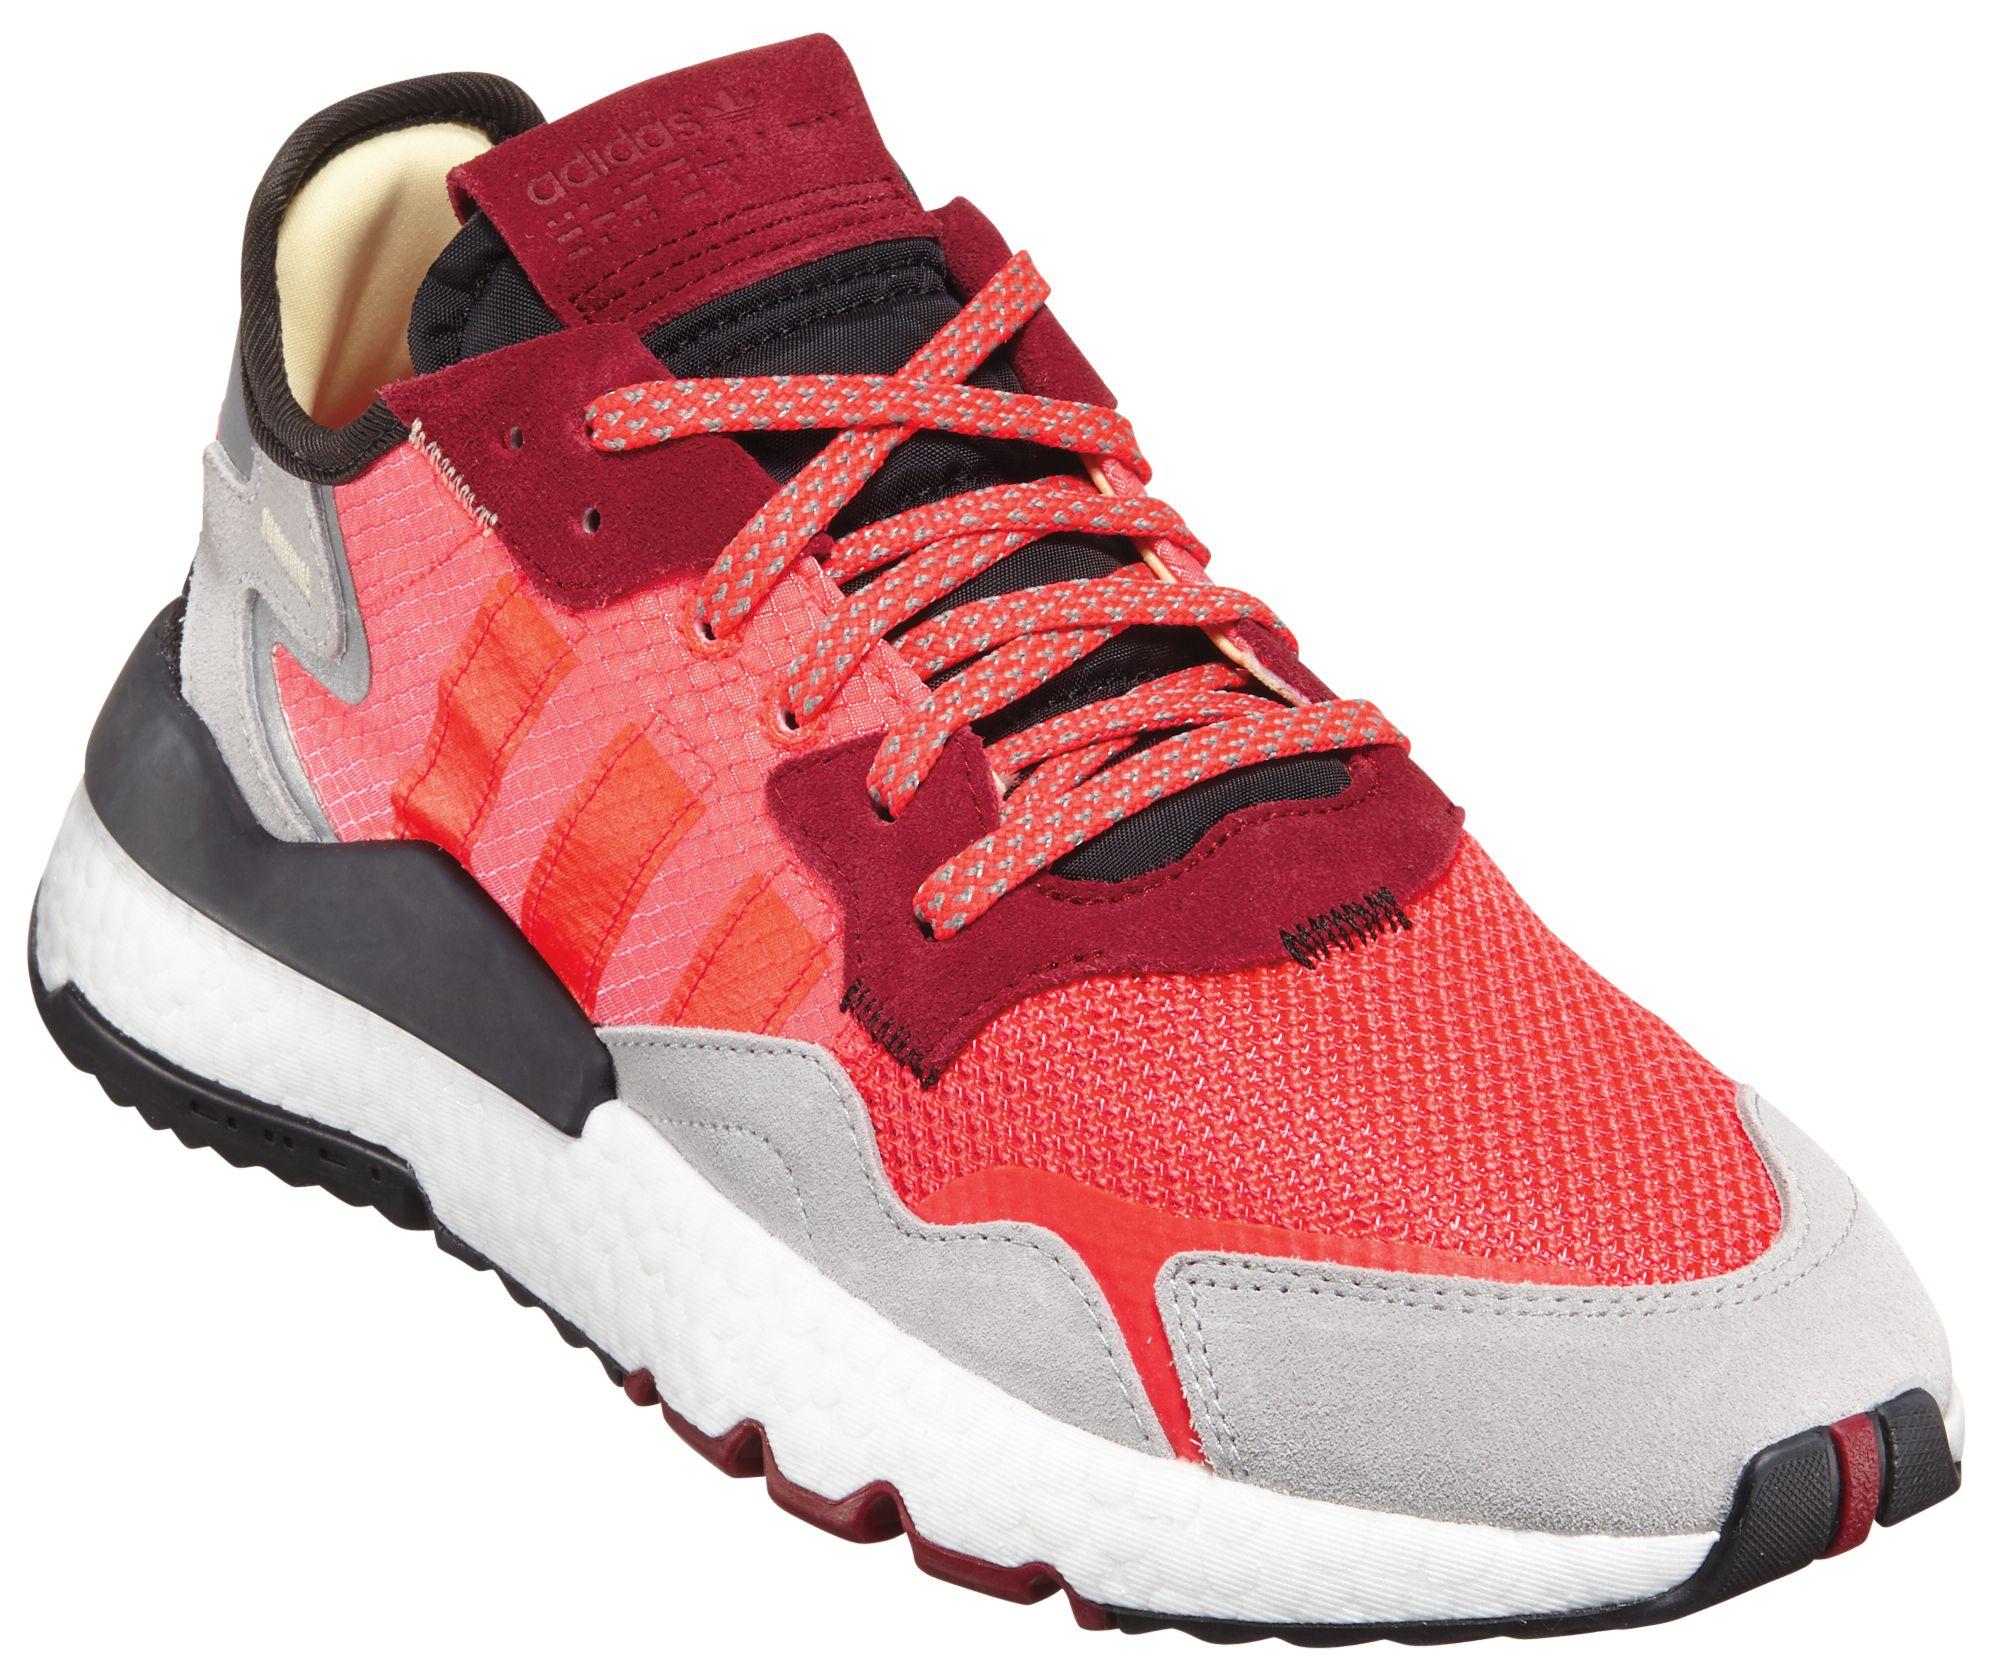 adidas Lace Originals Nite Jogger Shoes in Red/Grey (Red